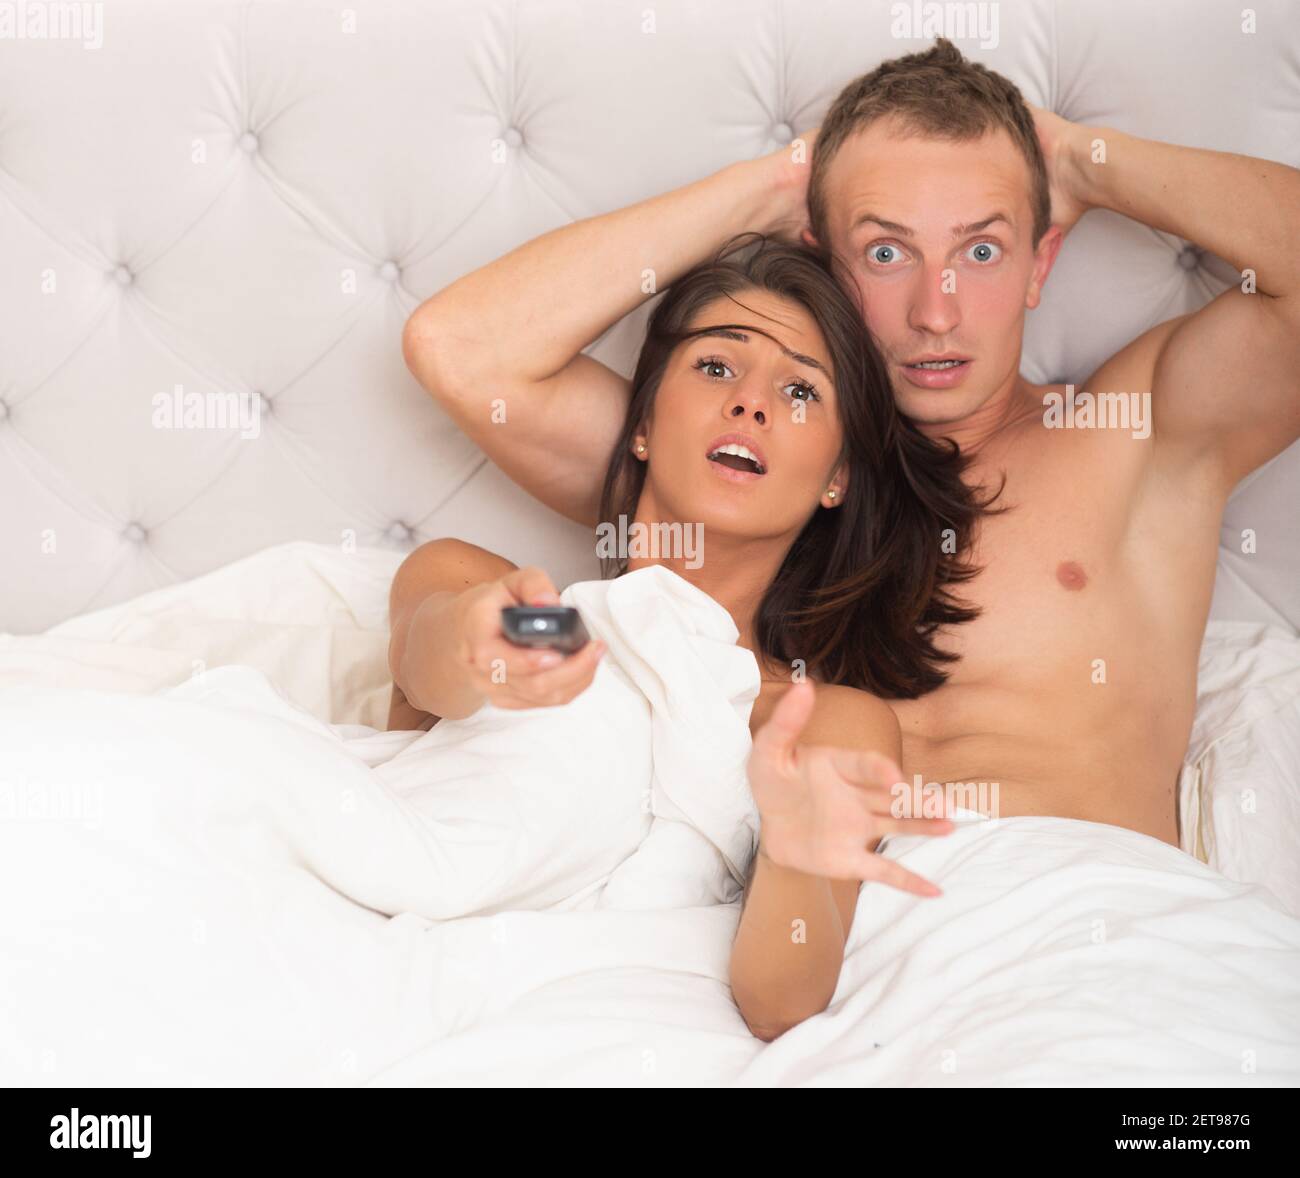 Scary movies. Couple in bed watching horror films picture